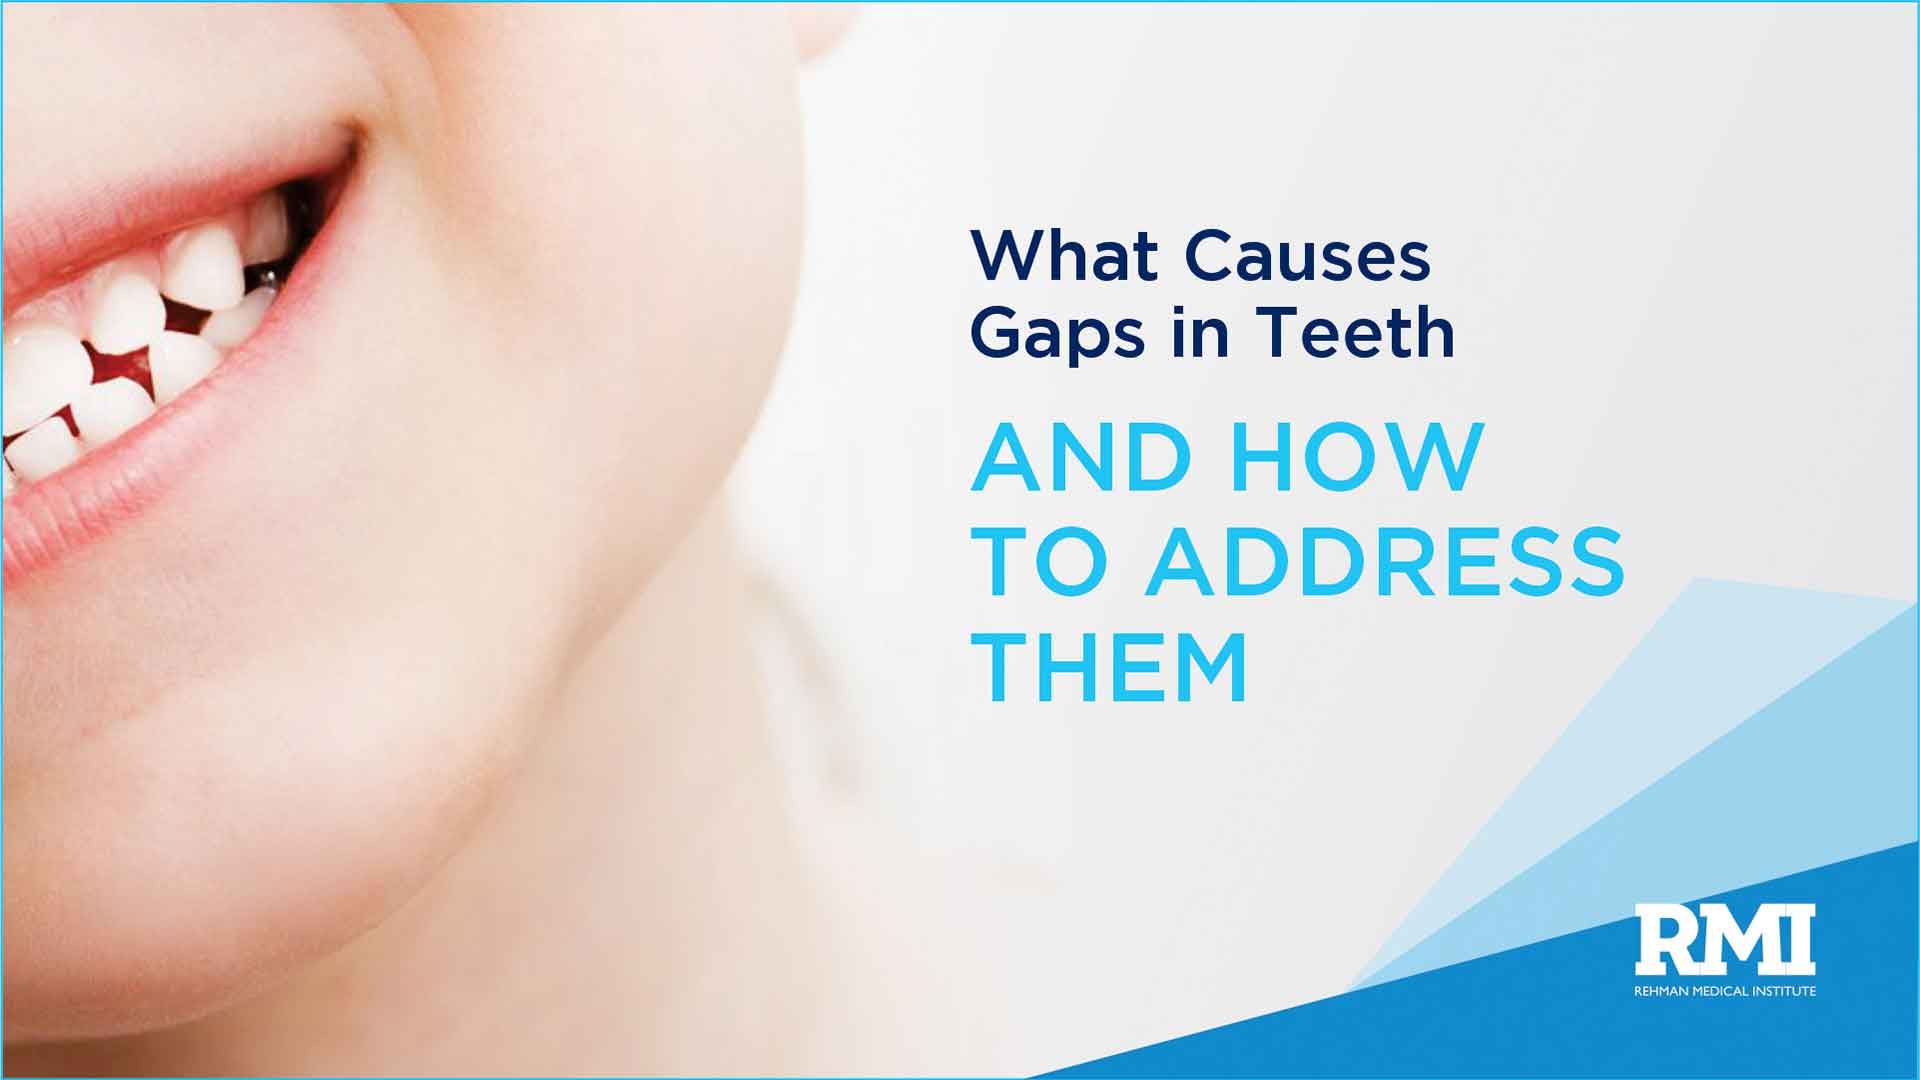 What Causes Gaps in Teeth and How to Address Them